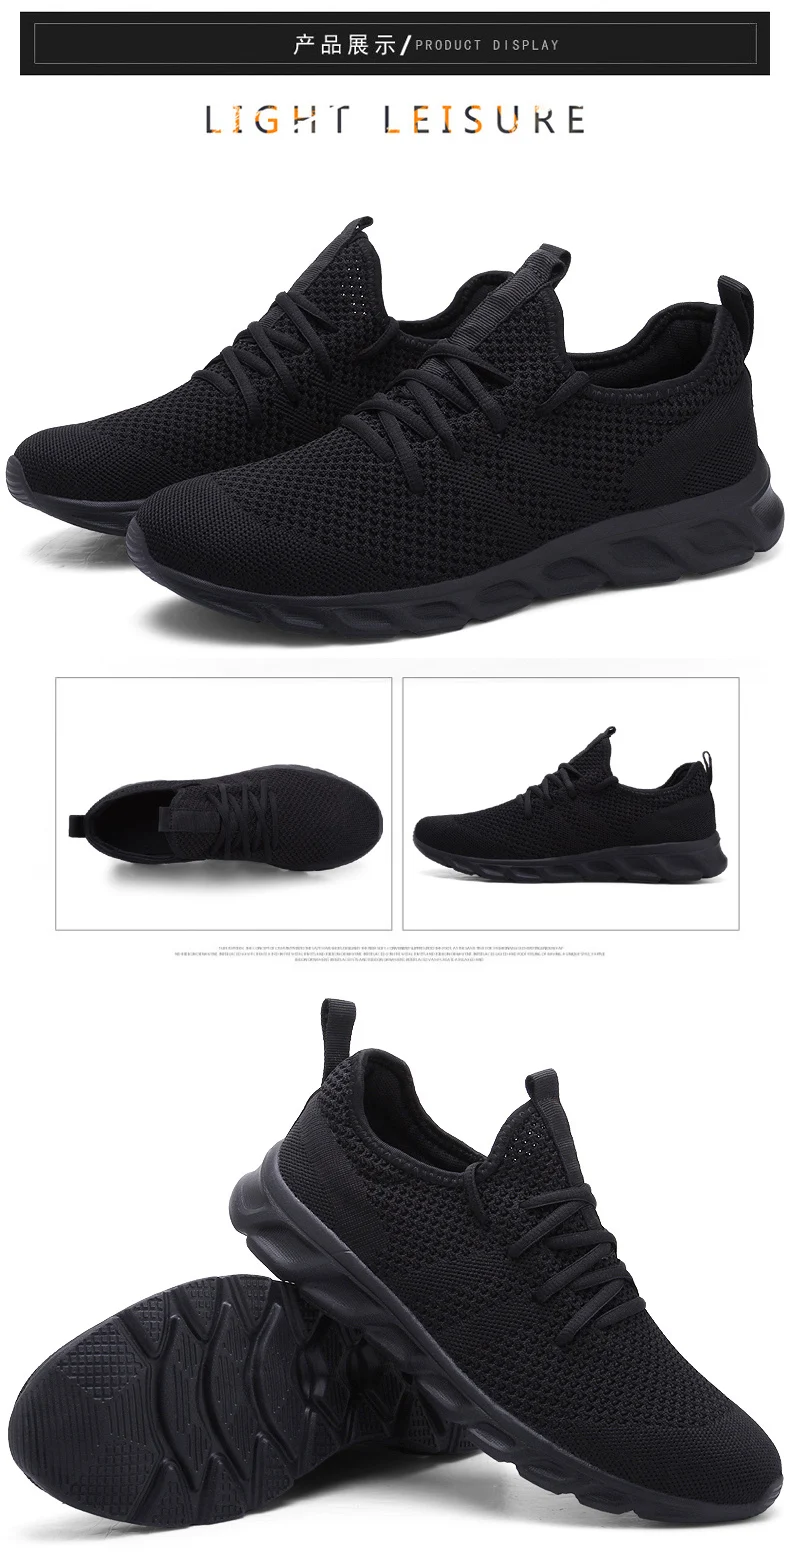 H22c0aaf15d06425cb45b3a025247a9e7T Men Light Running Shoes Flyknit Breathable Lace-Up Jogging Shoes for Man Sneakers Anti-Odor Men's Casual Shoes Drop Shipping